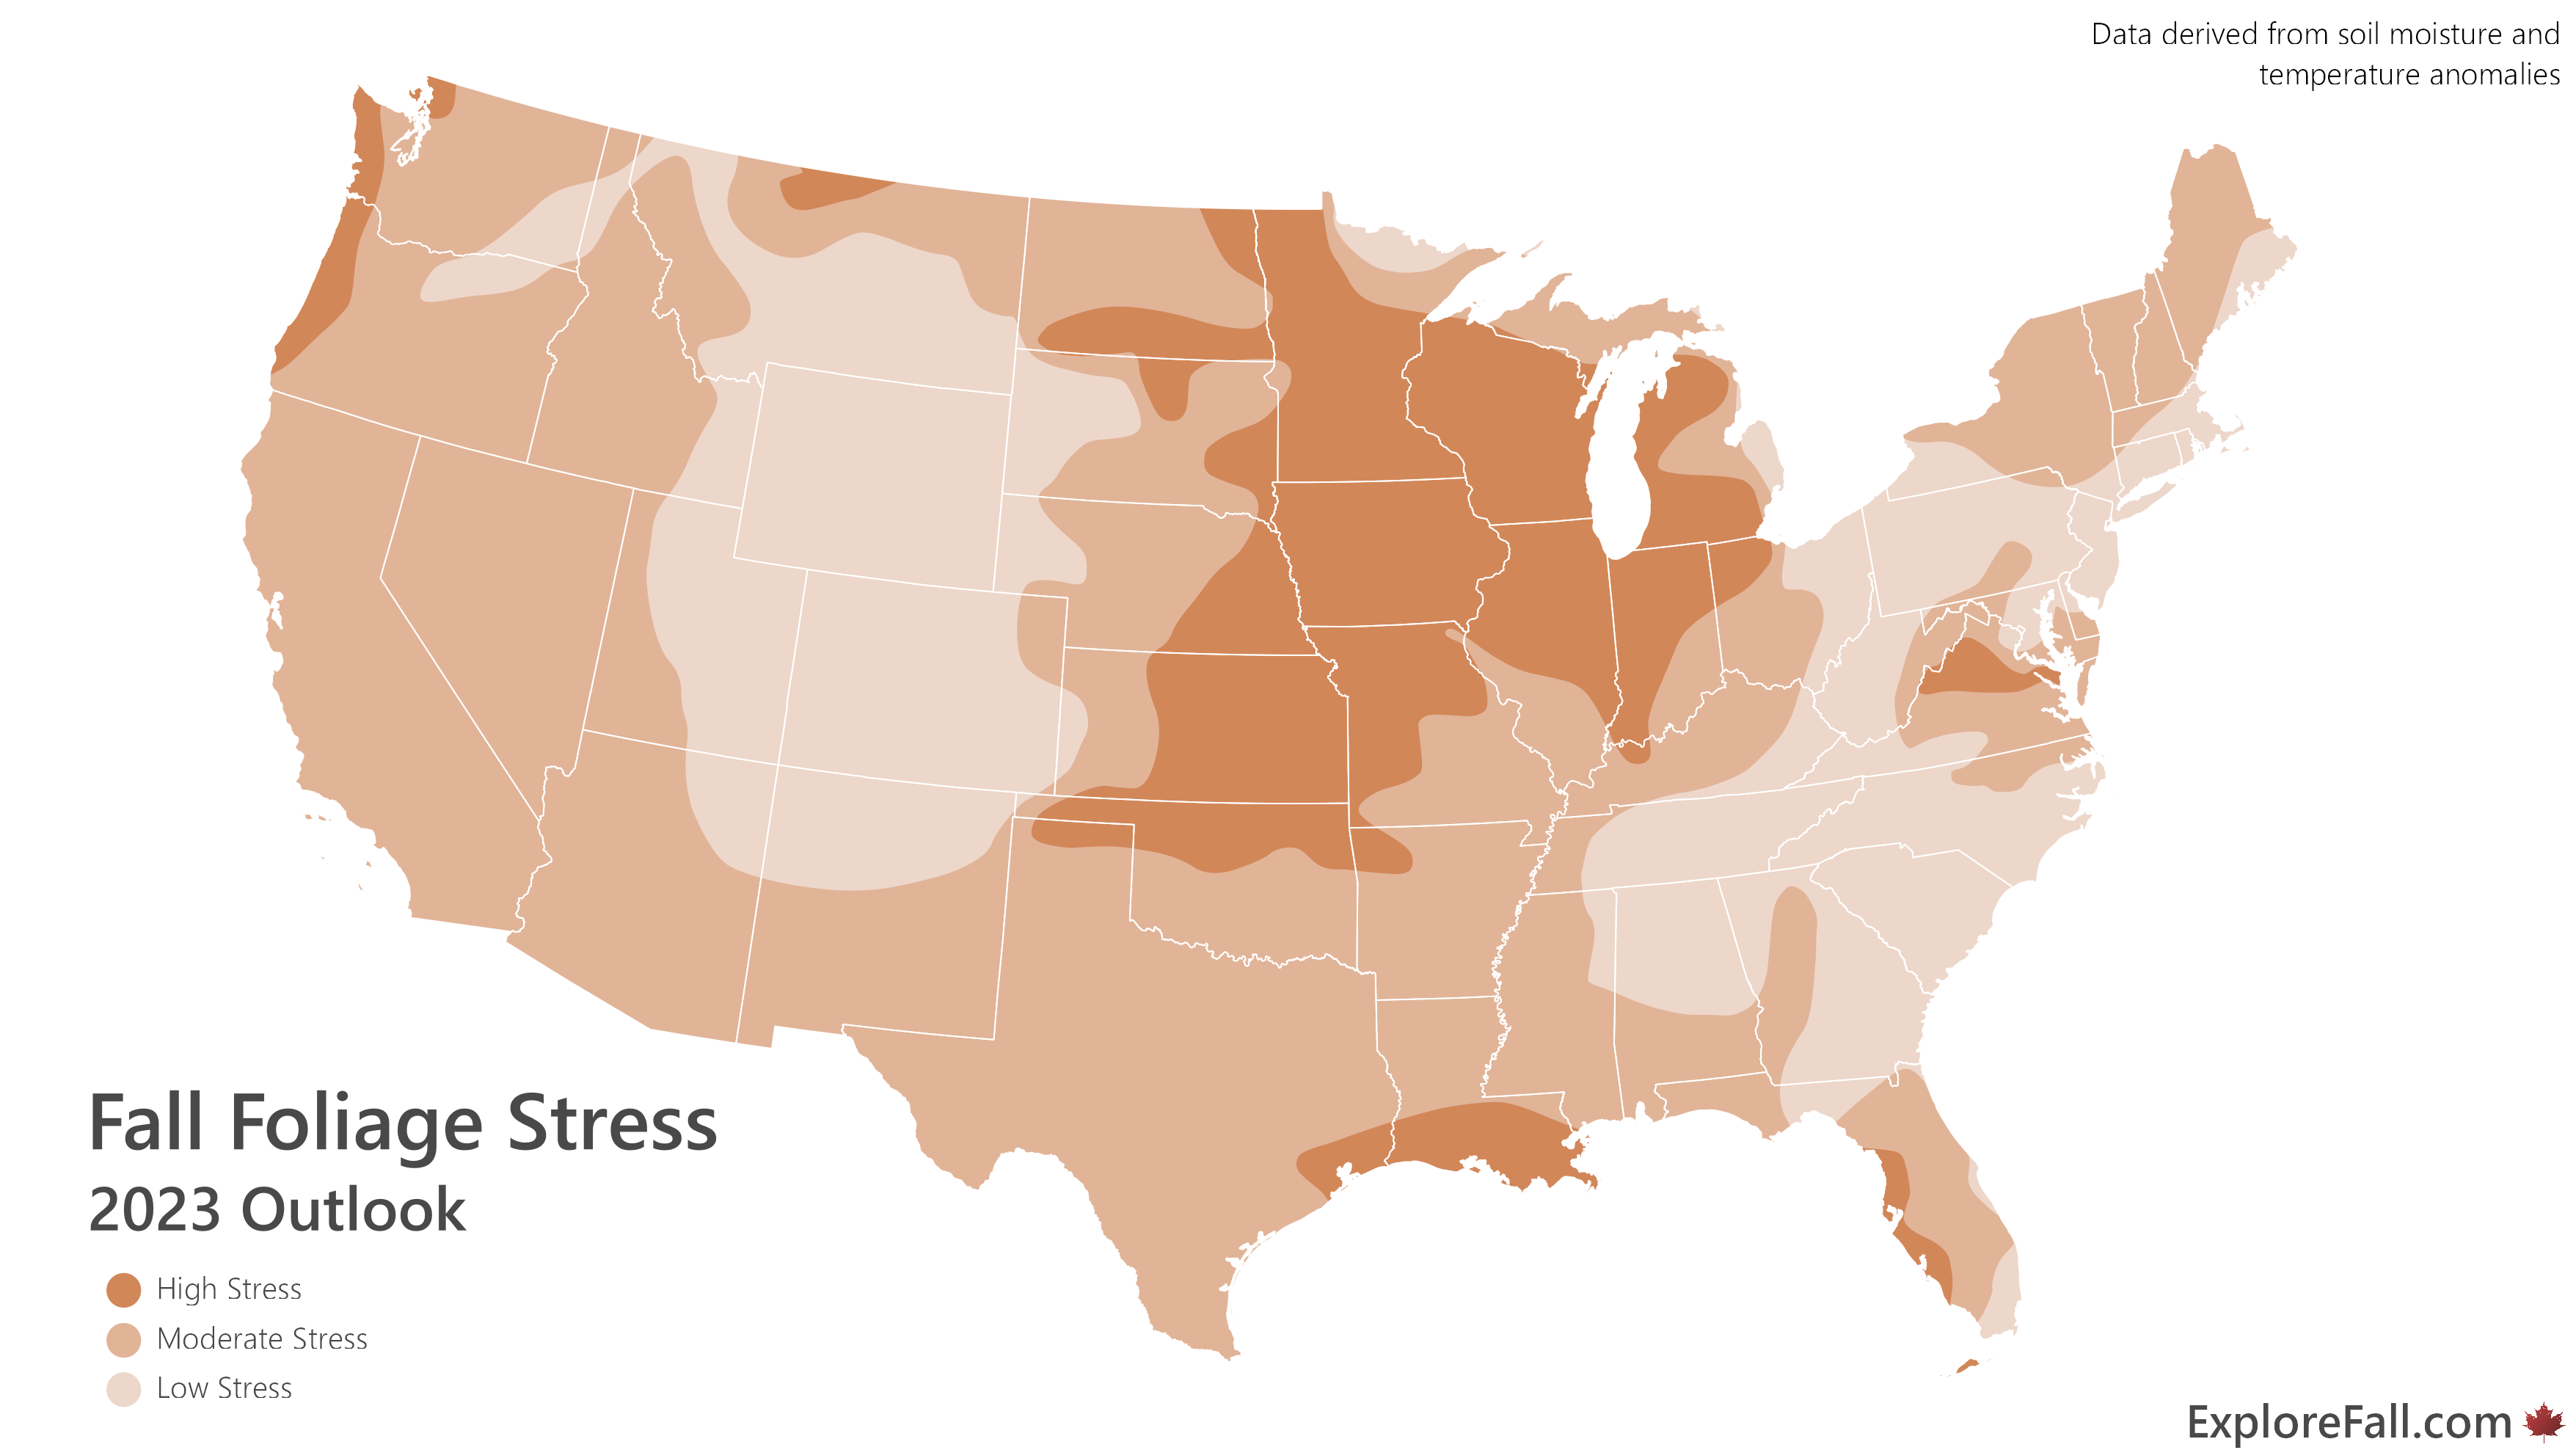 Map showing where fall foliage is likely to be abnormal this year.